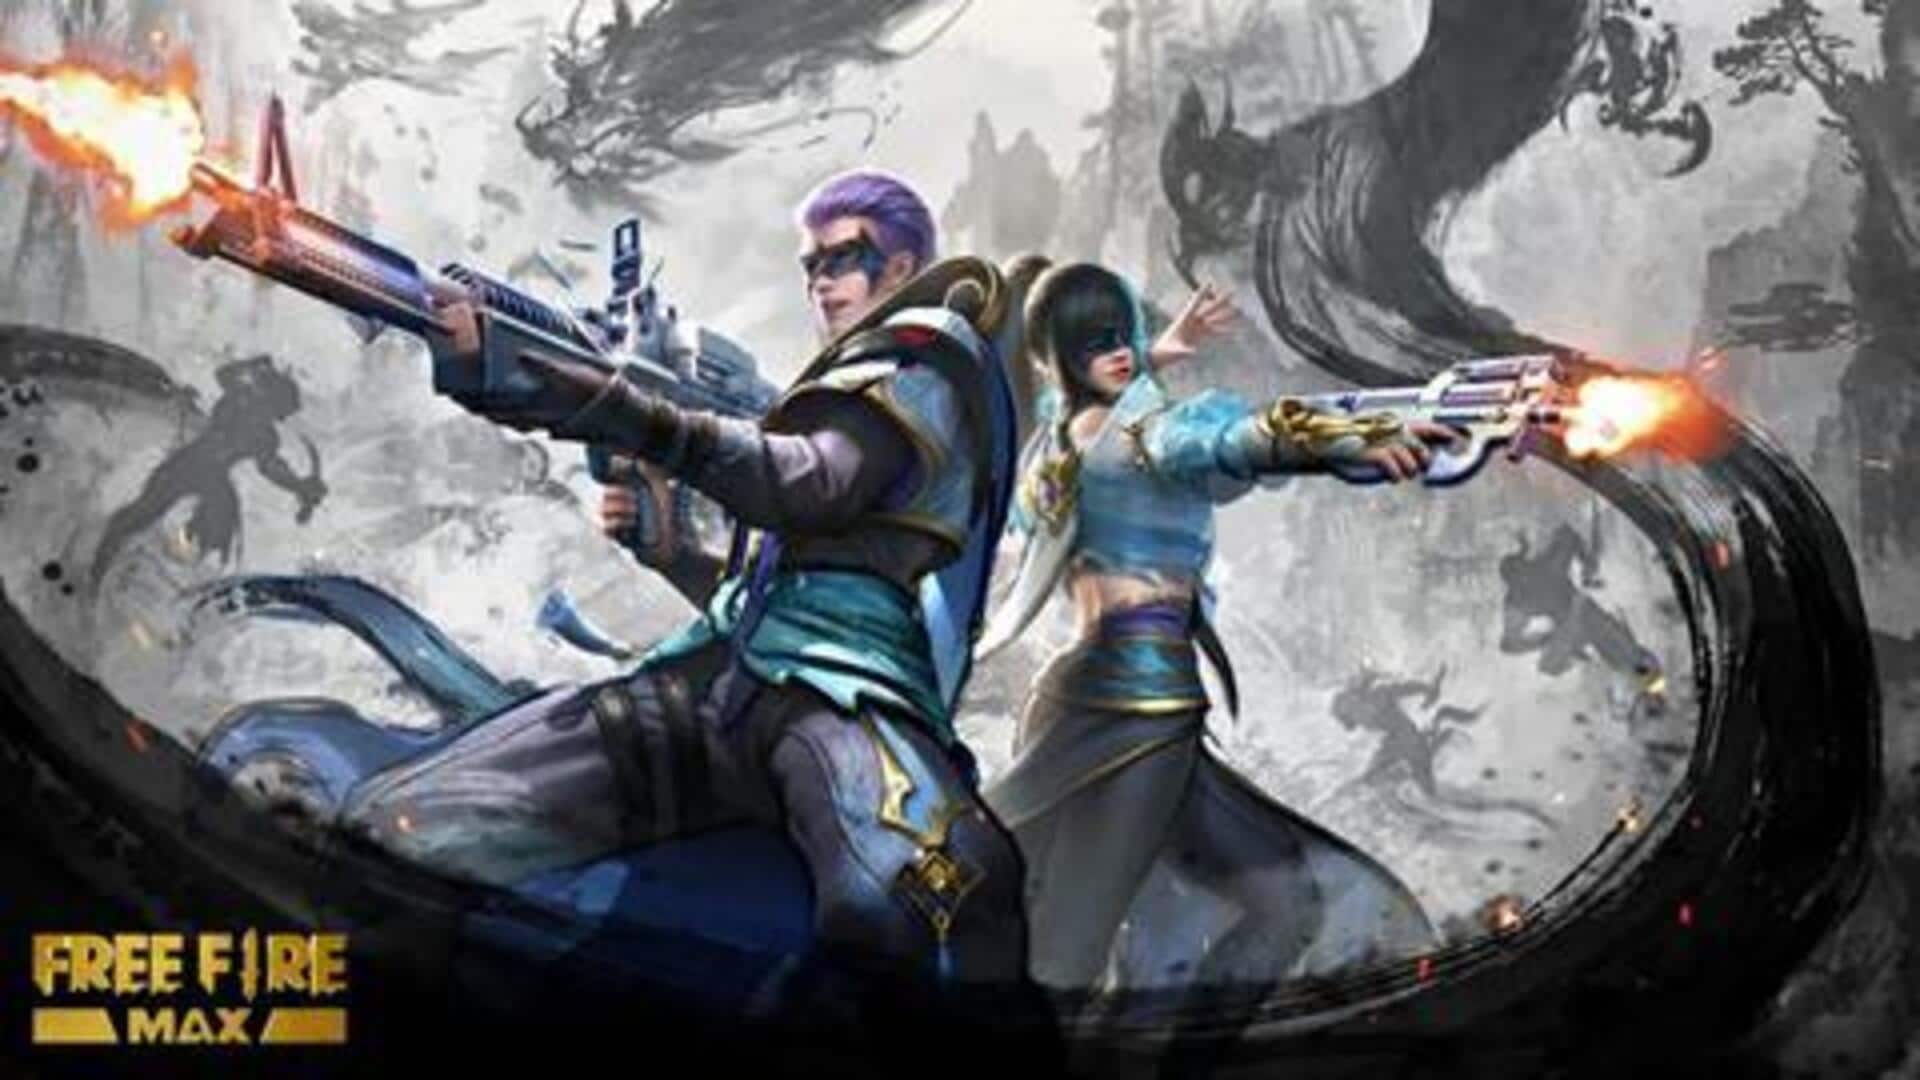 Garena Free Fire MAX June 12 codes: How to redeem